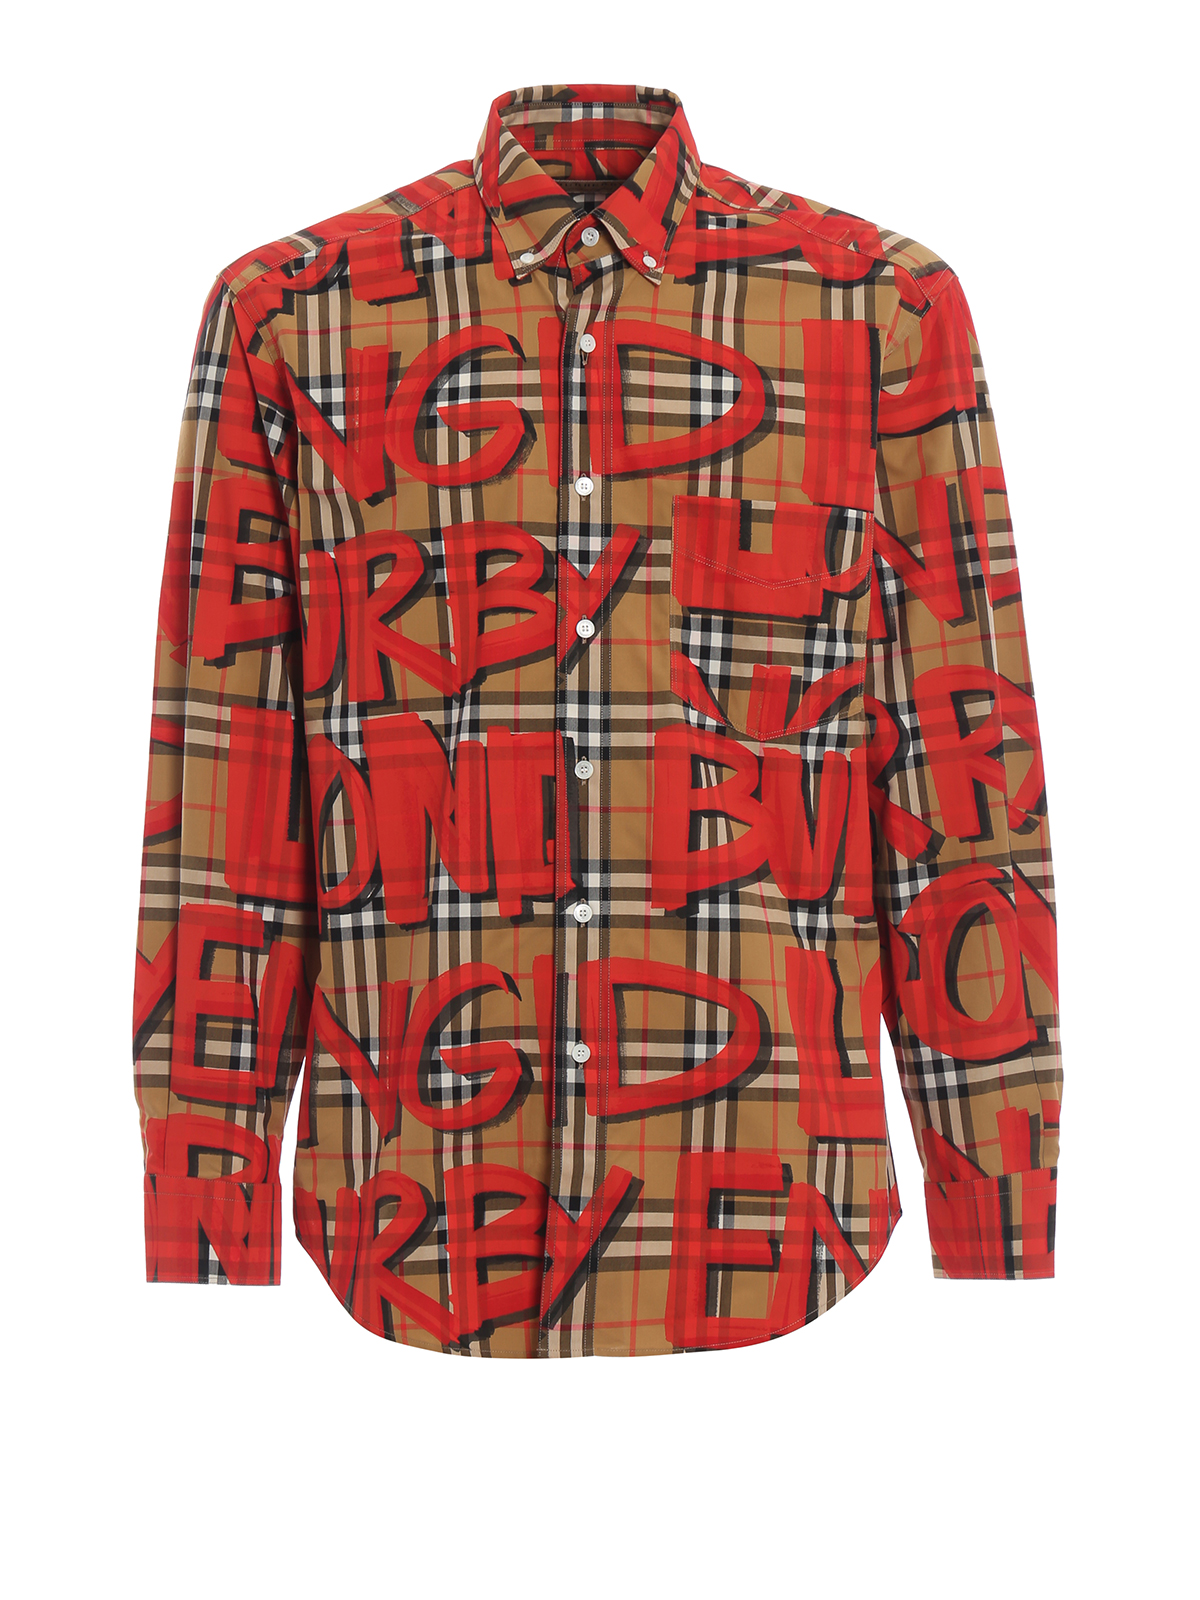 burberry shirt new collection